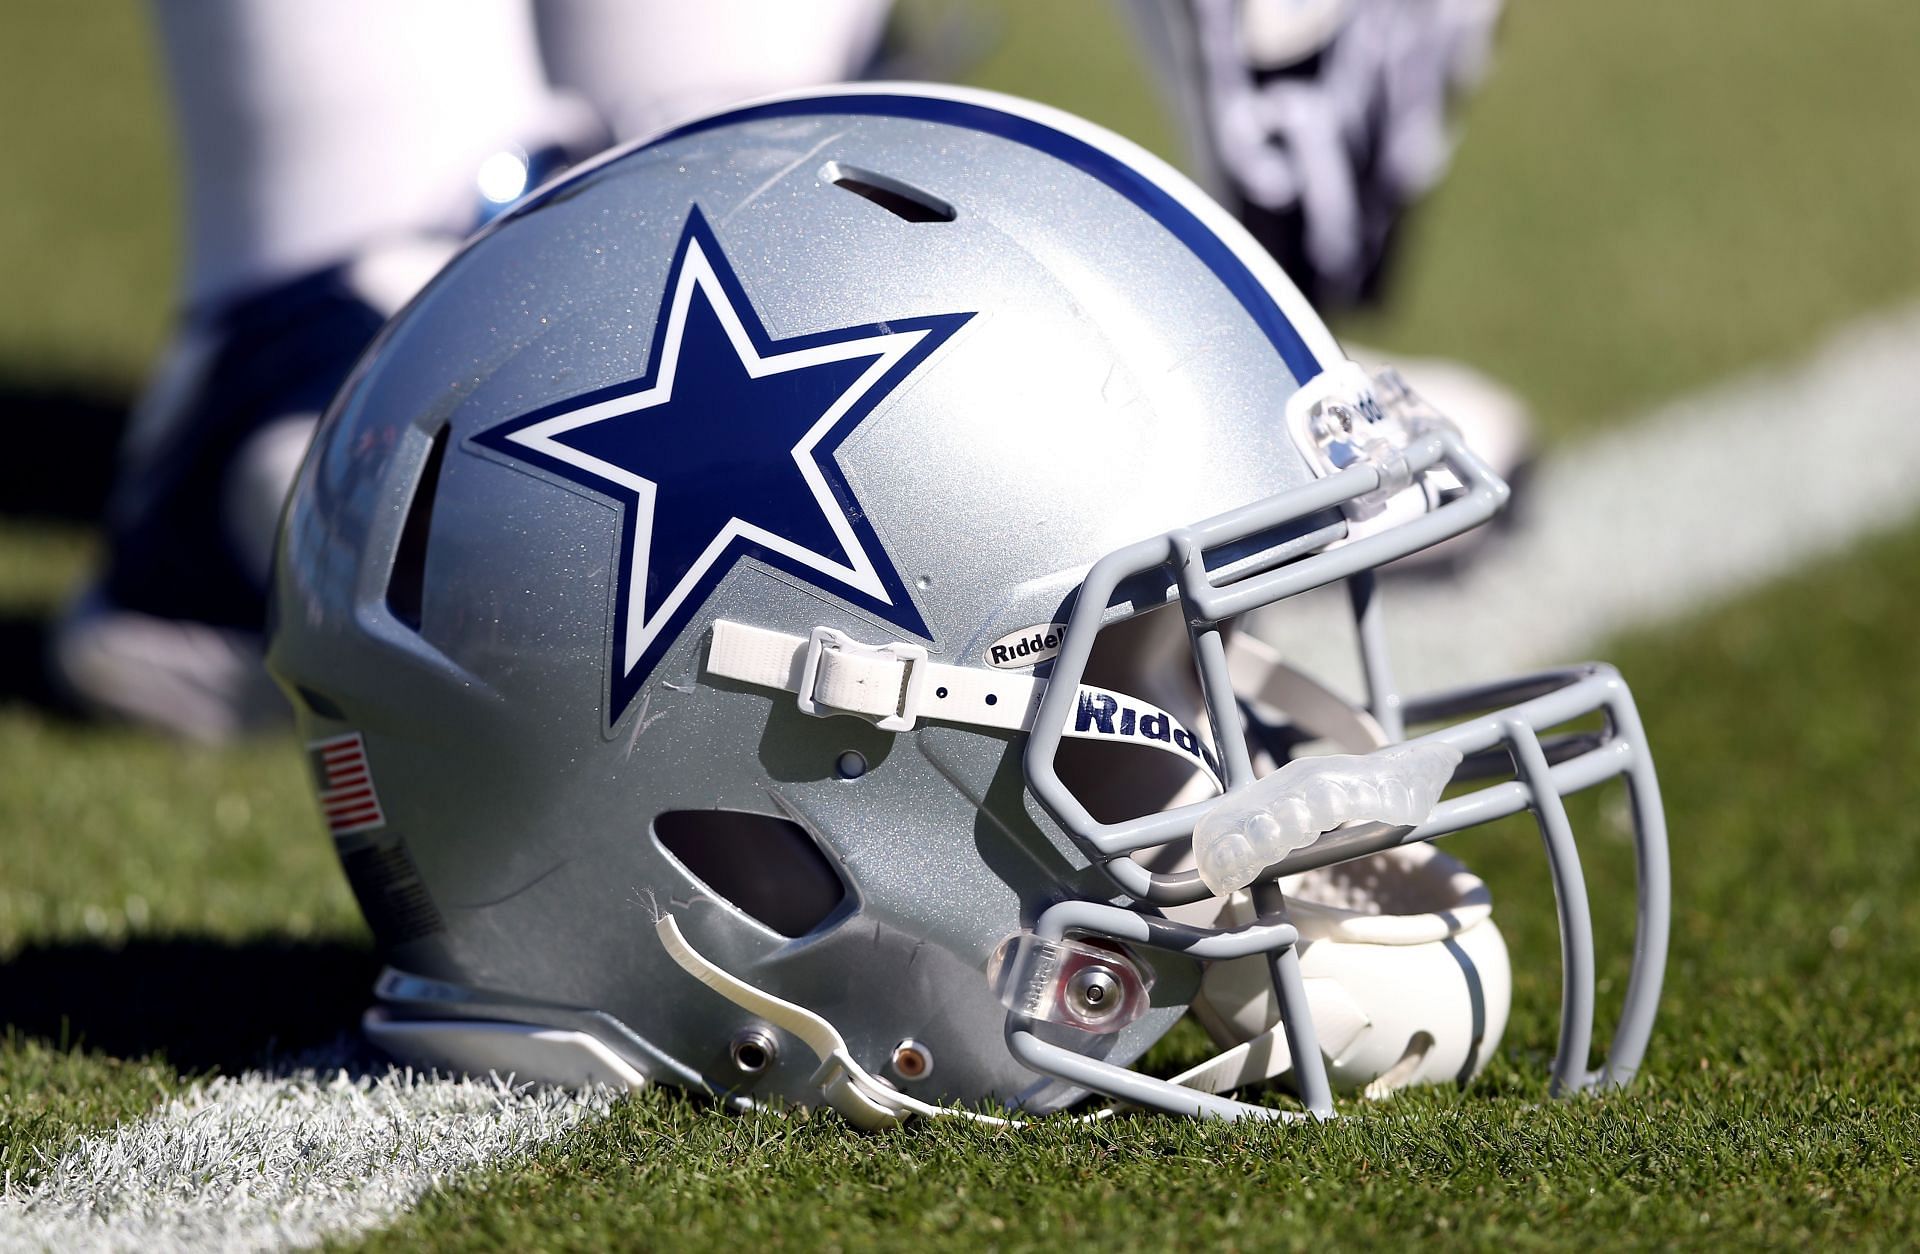 Dallas&#039; starred helmets have been part of an iconic NFL aesthetic